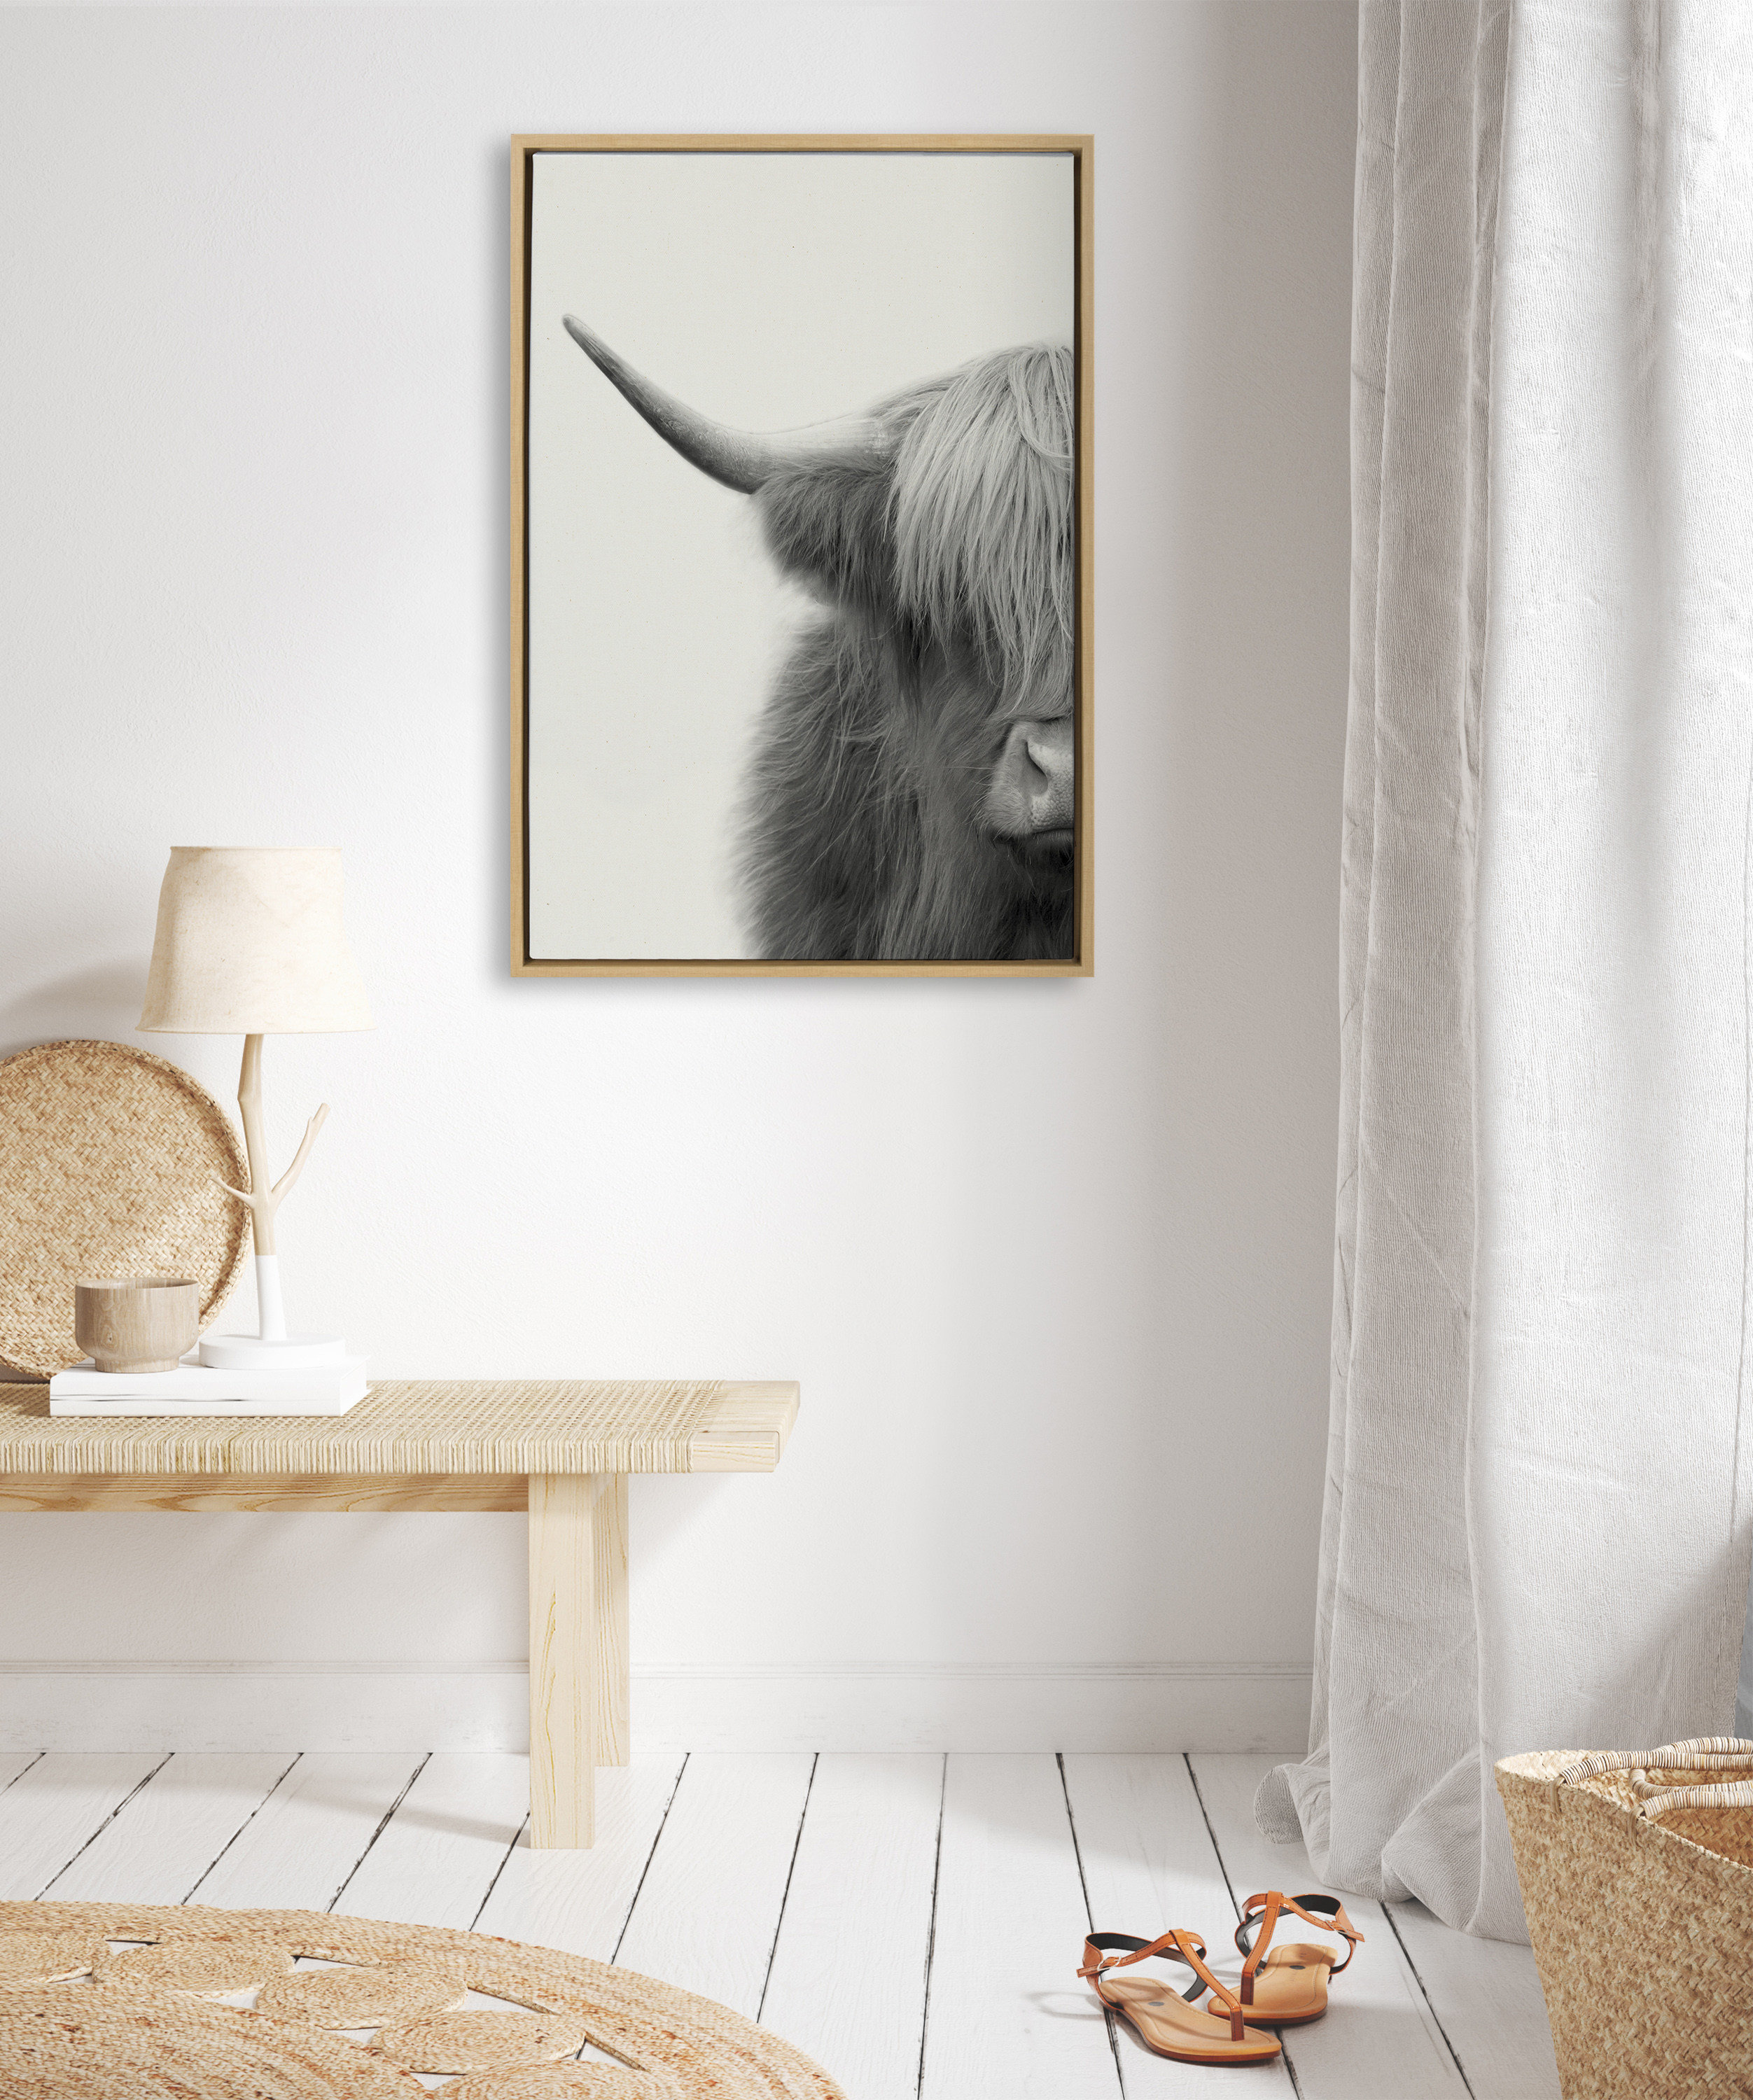 Foundry Select Hey Dude Highland Cow Crop Framed On Canvas by The Creative  Bunch Studio Print & Reviews